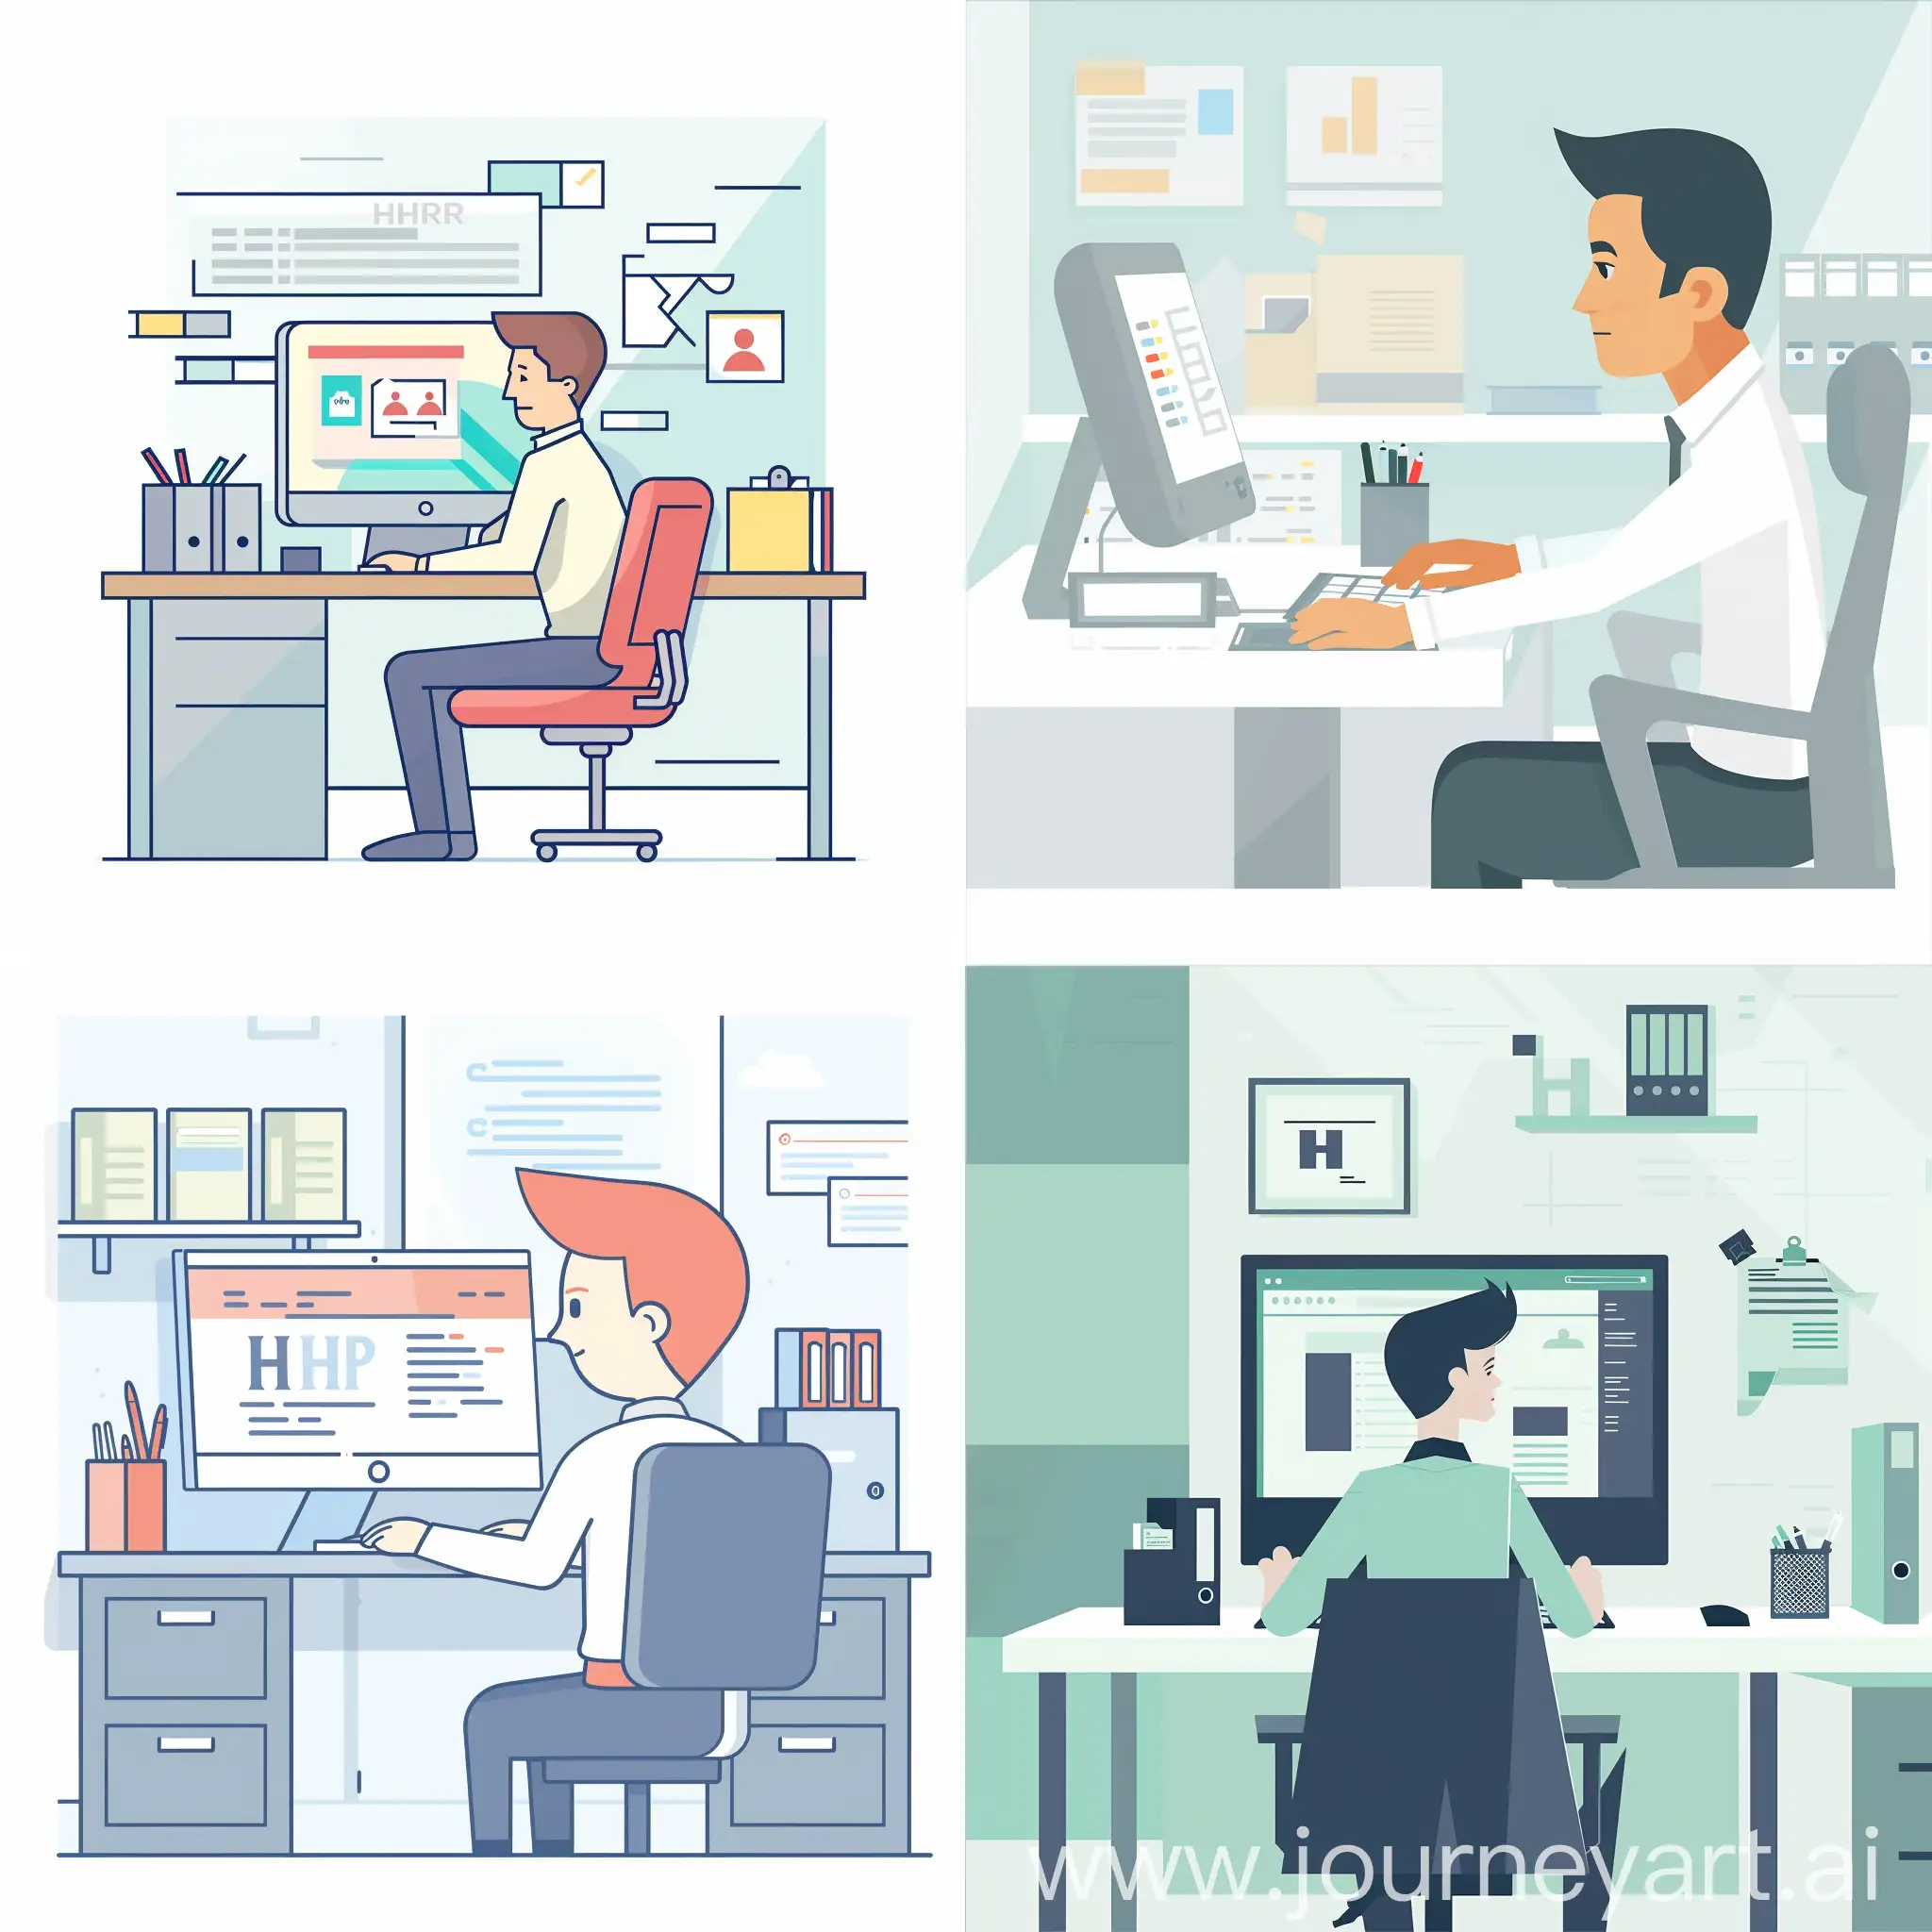 Efficient-HR-Professional-in-Flat-Illustration-Style-Office